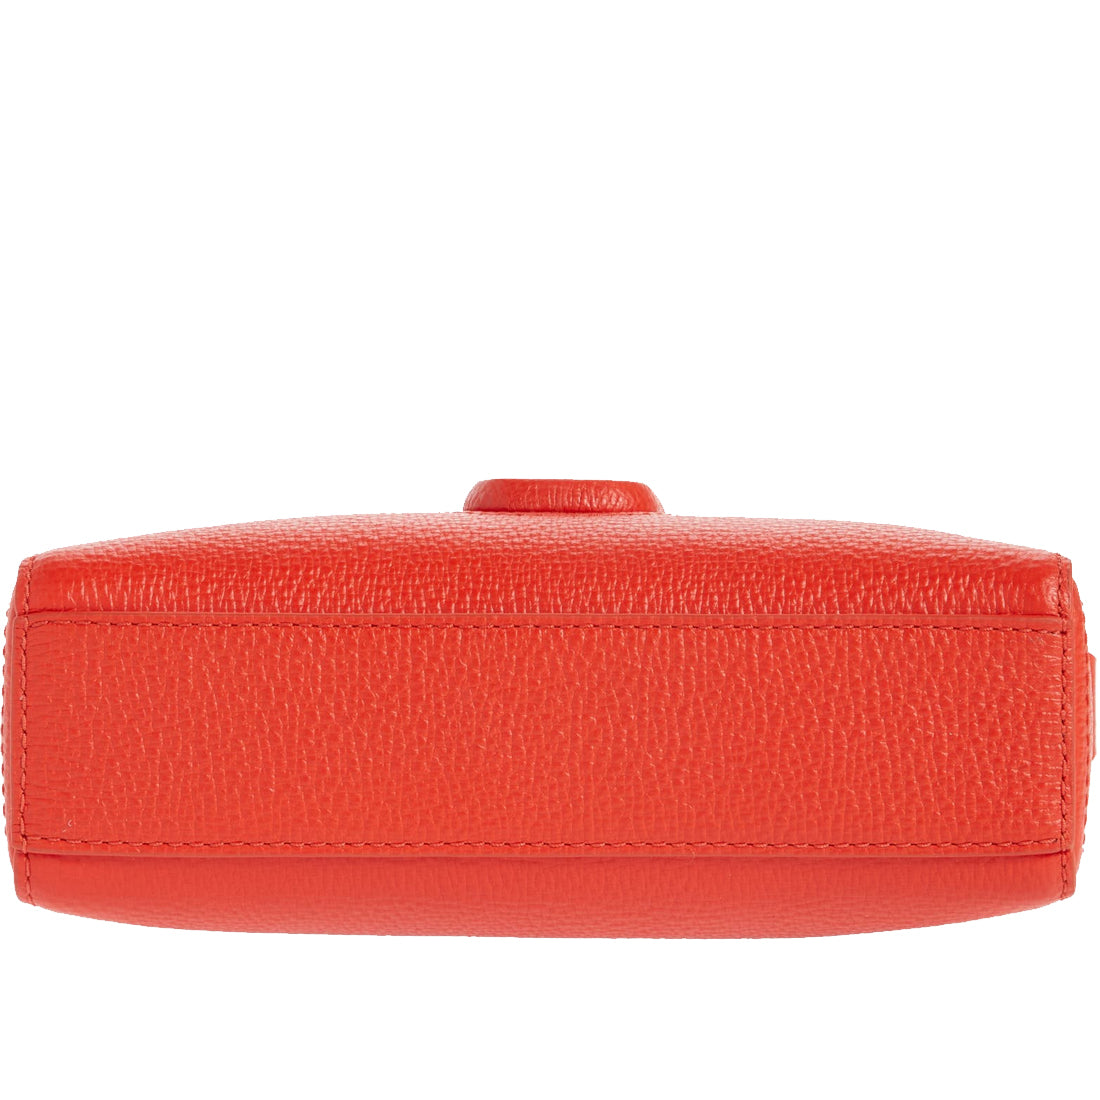 Marc Jacobs The Shutter Crossbody Bag in Poinciana M0015468 ...